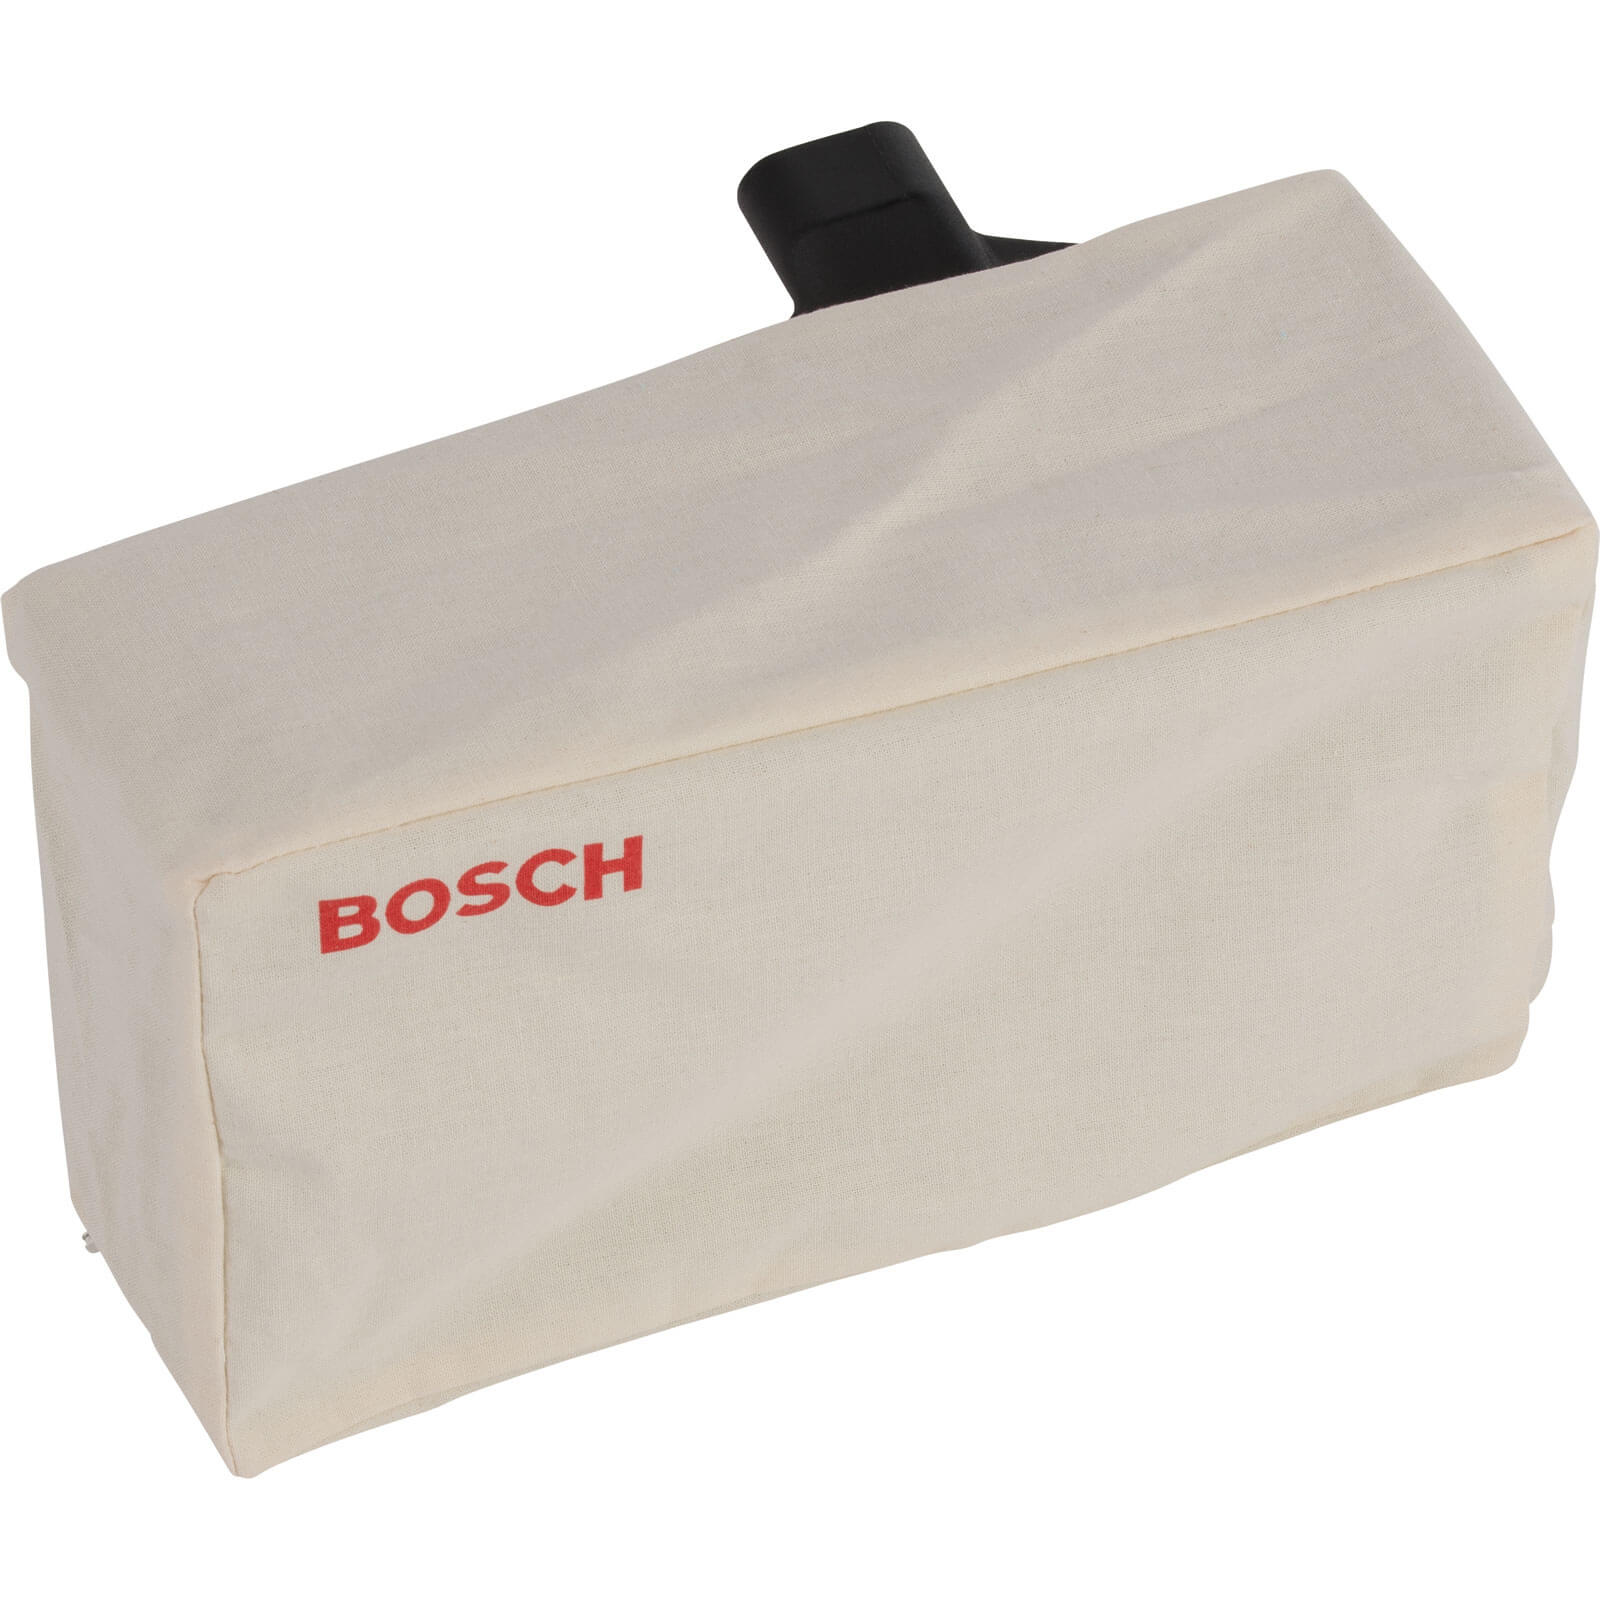 Photo of Bosch Dust Bag For Gho 3-82 Planers